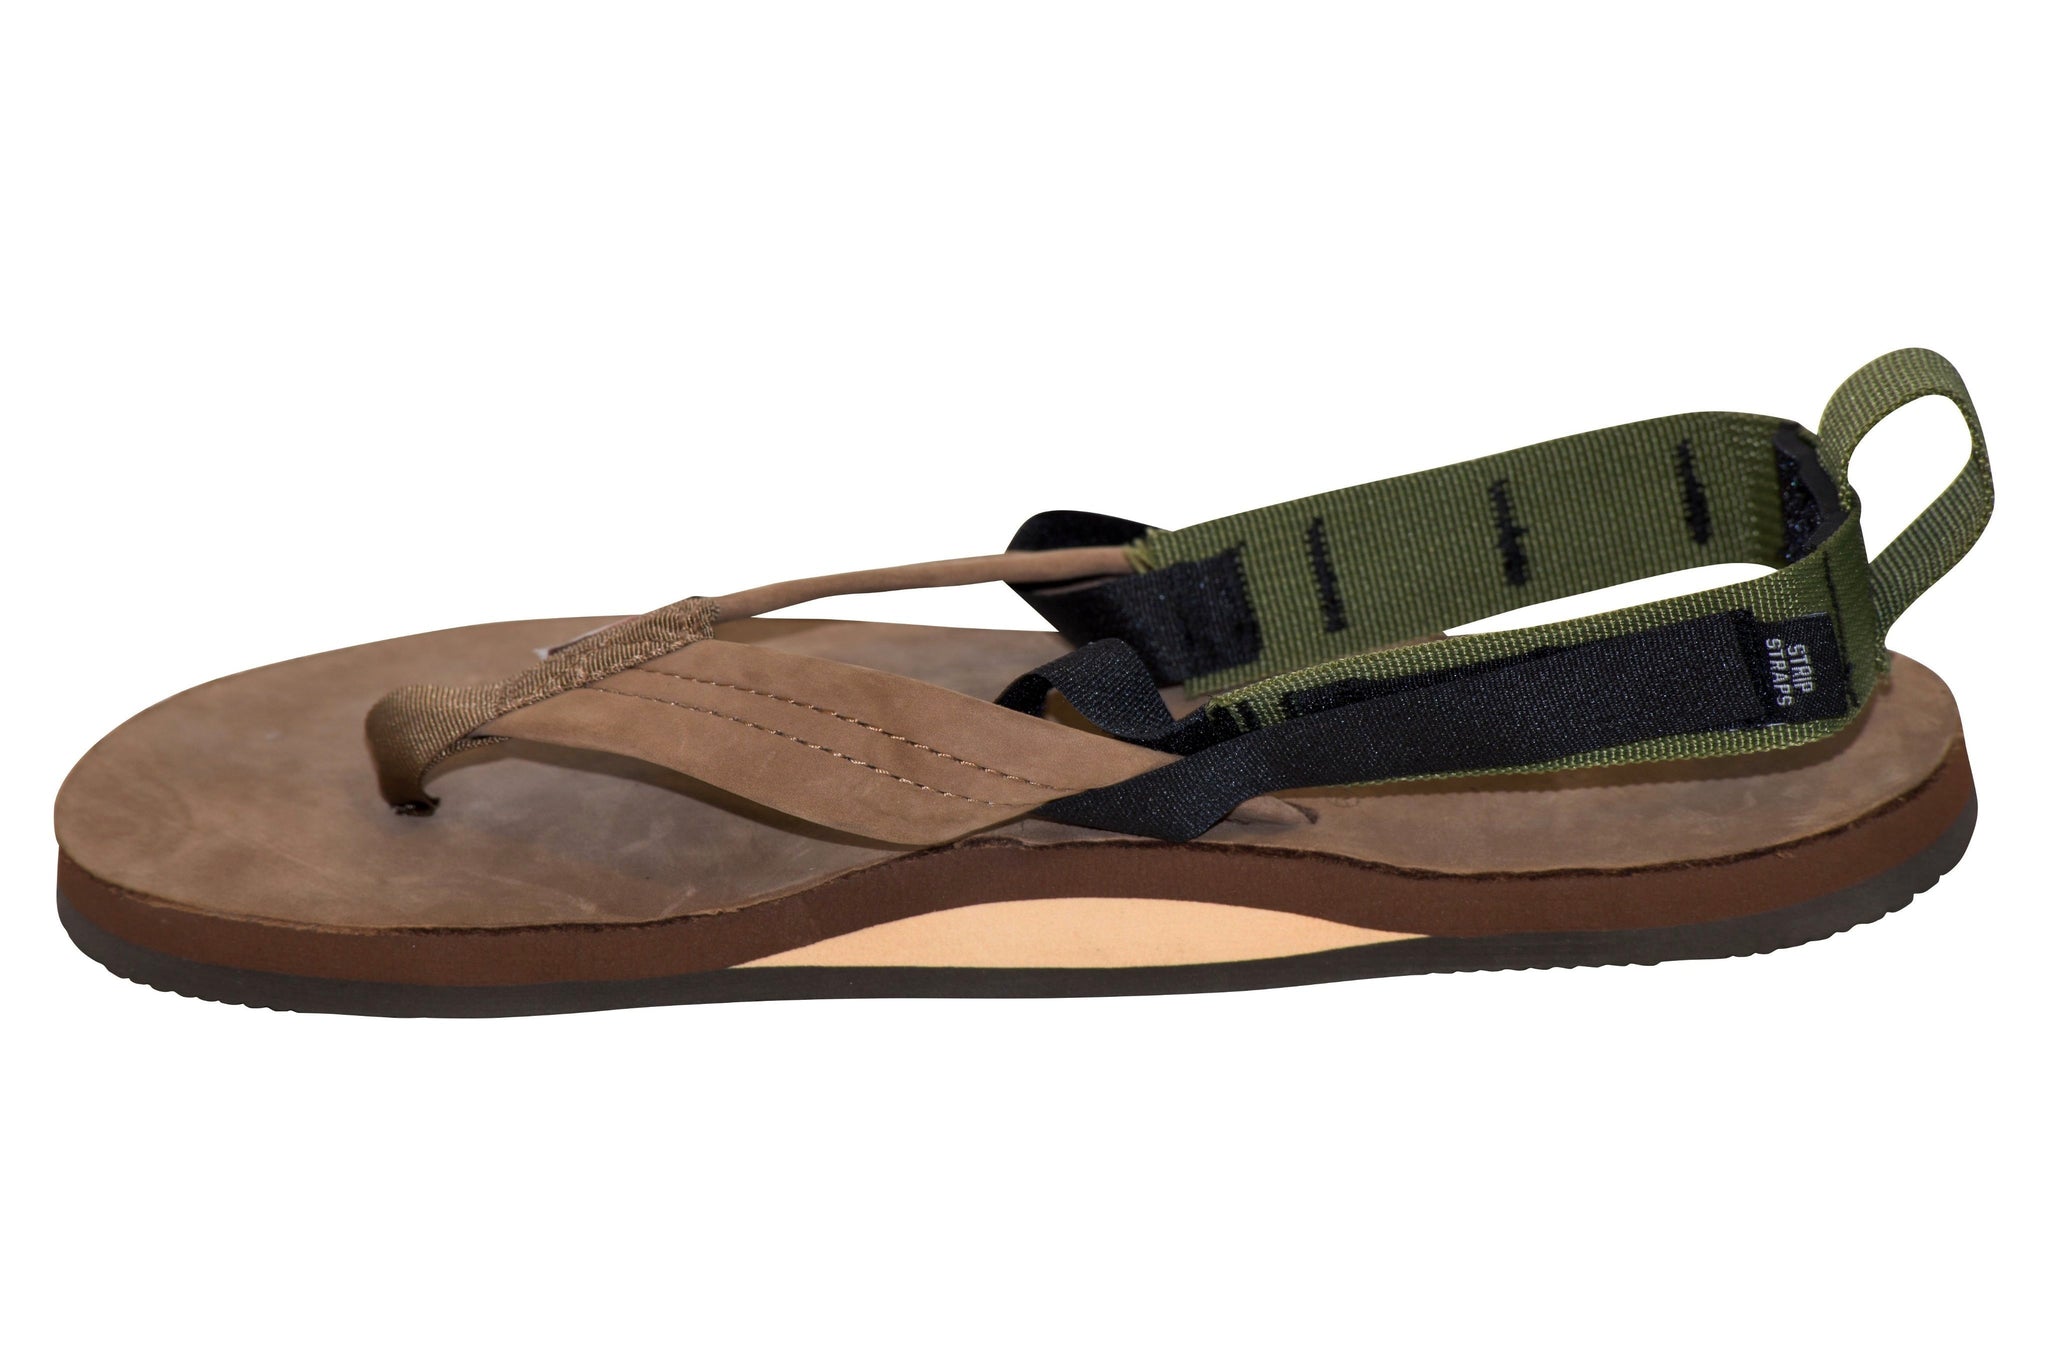 mens sandals with removable back strap